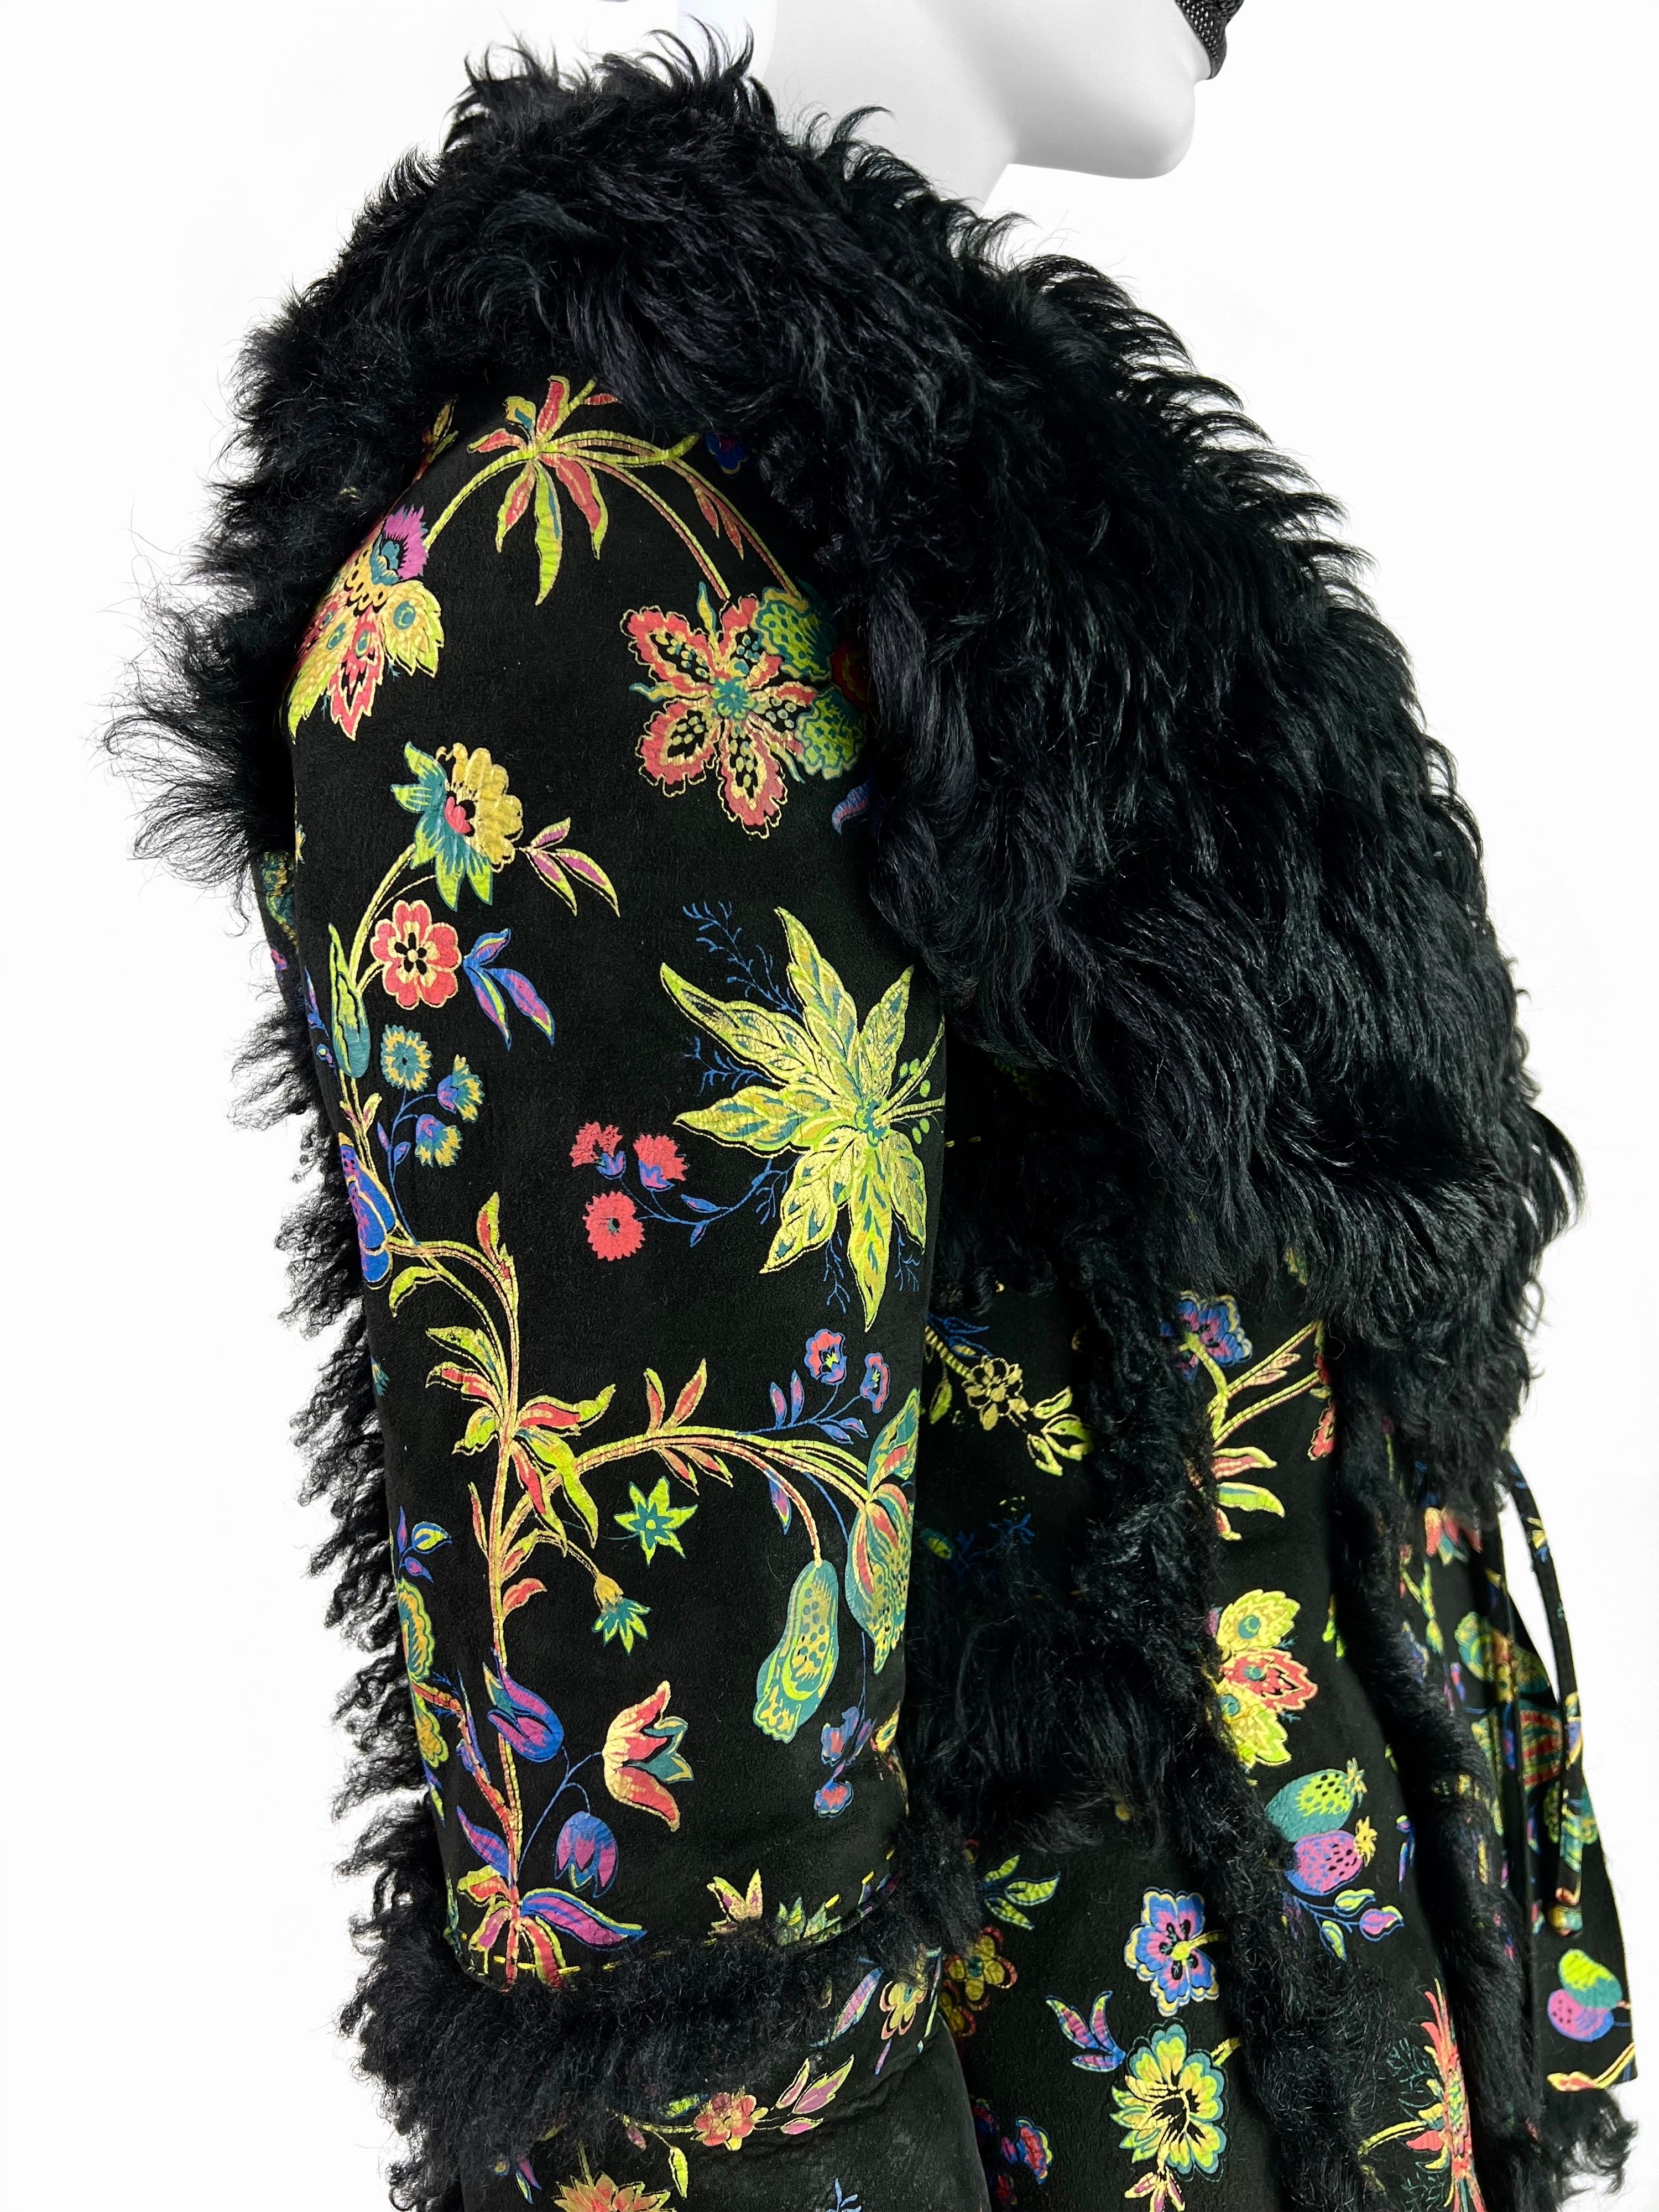 Roberto Cavalli Fall 1999 Hand-painted Flower Shearling Jacket For Sale 2